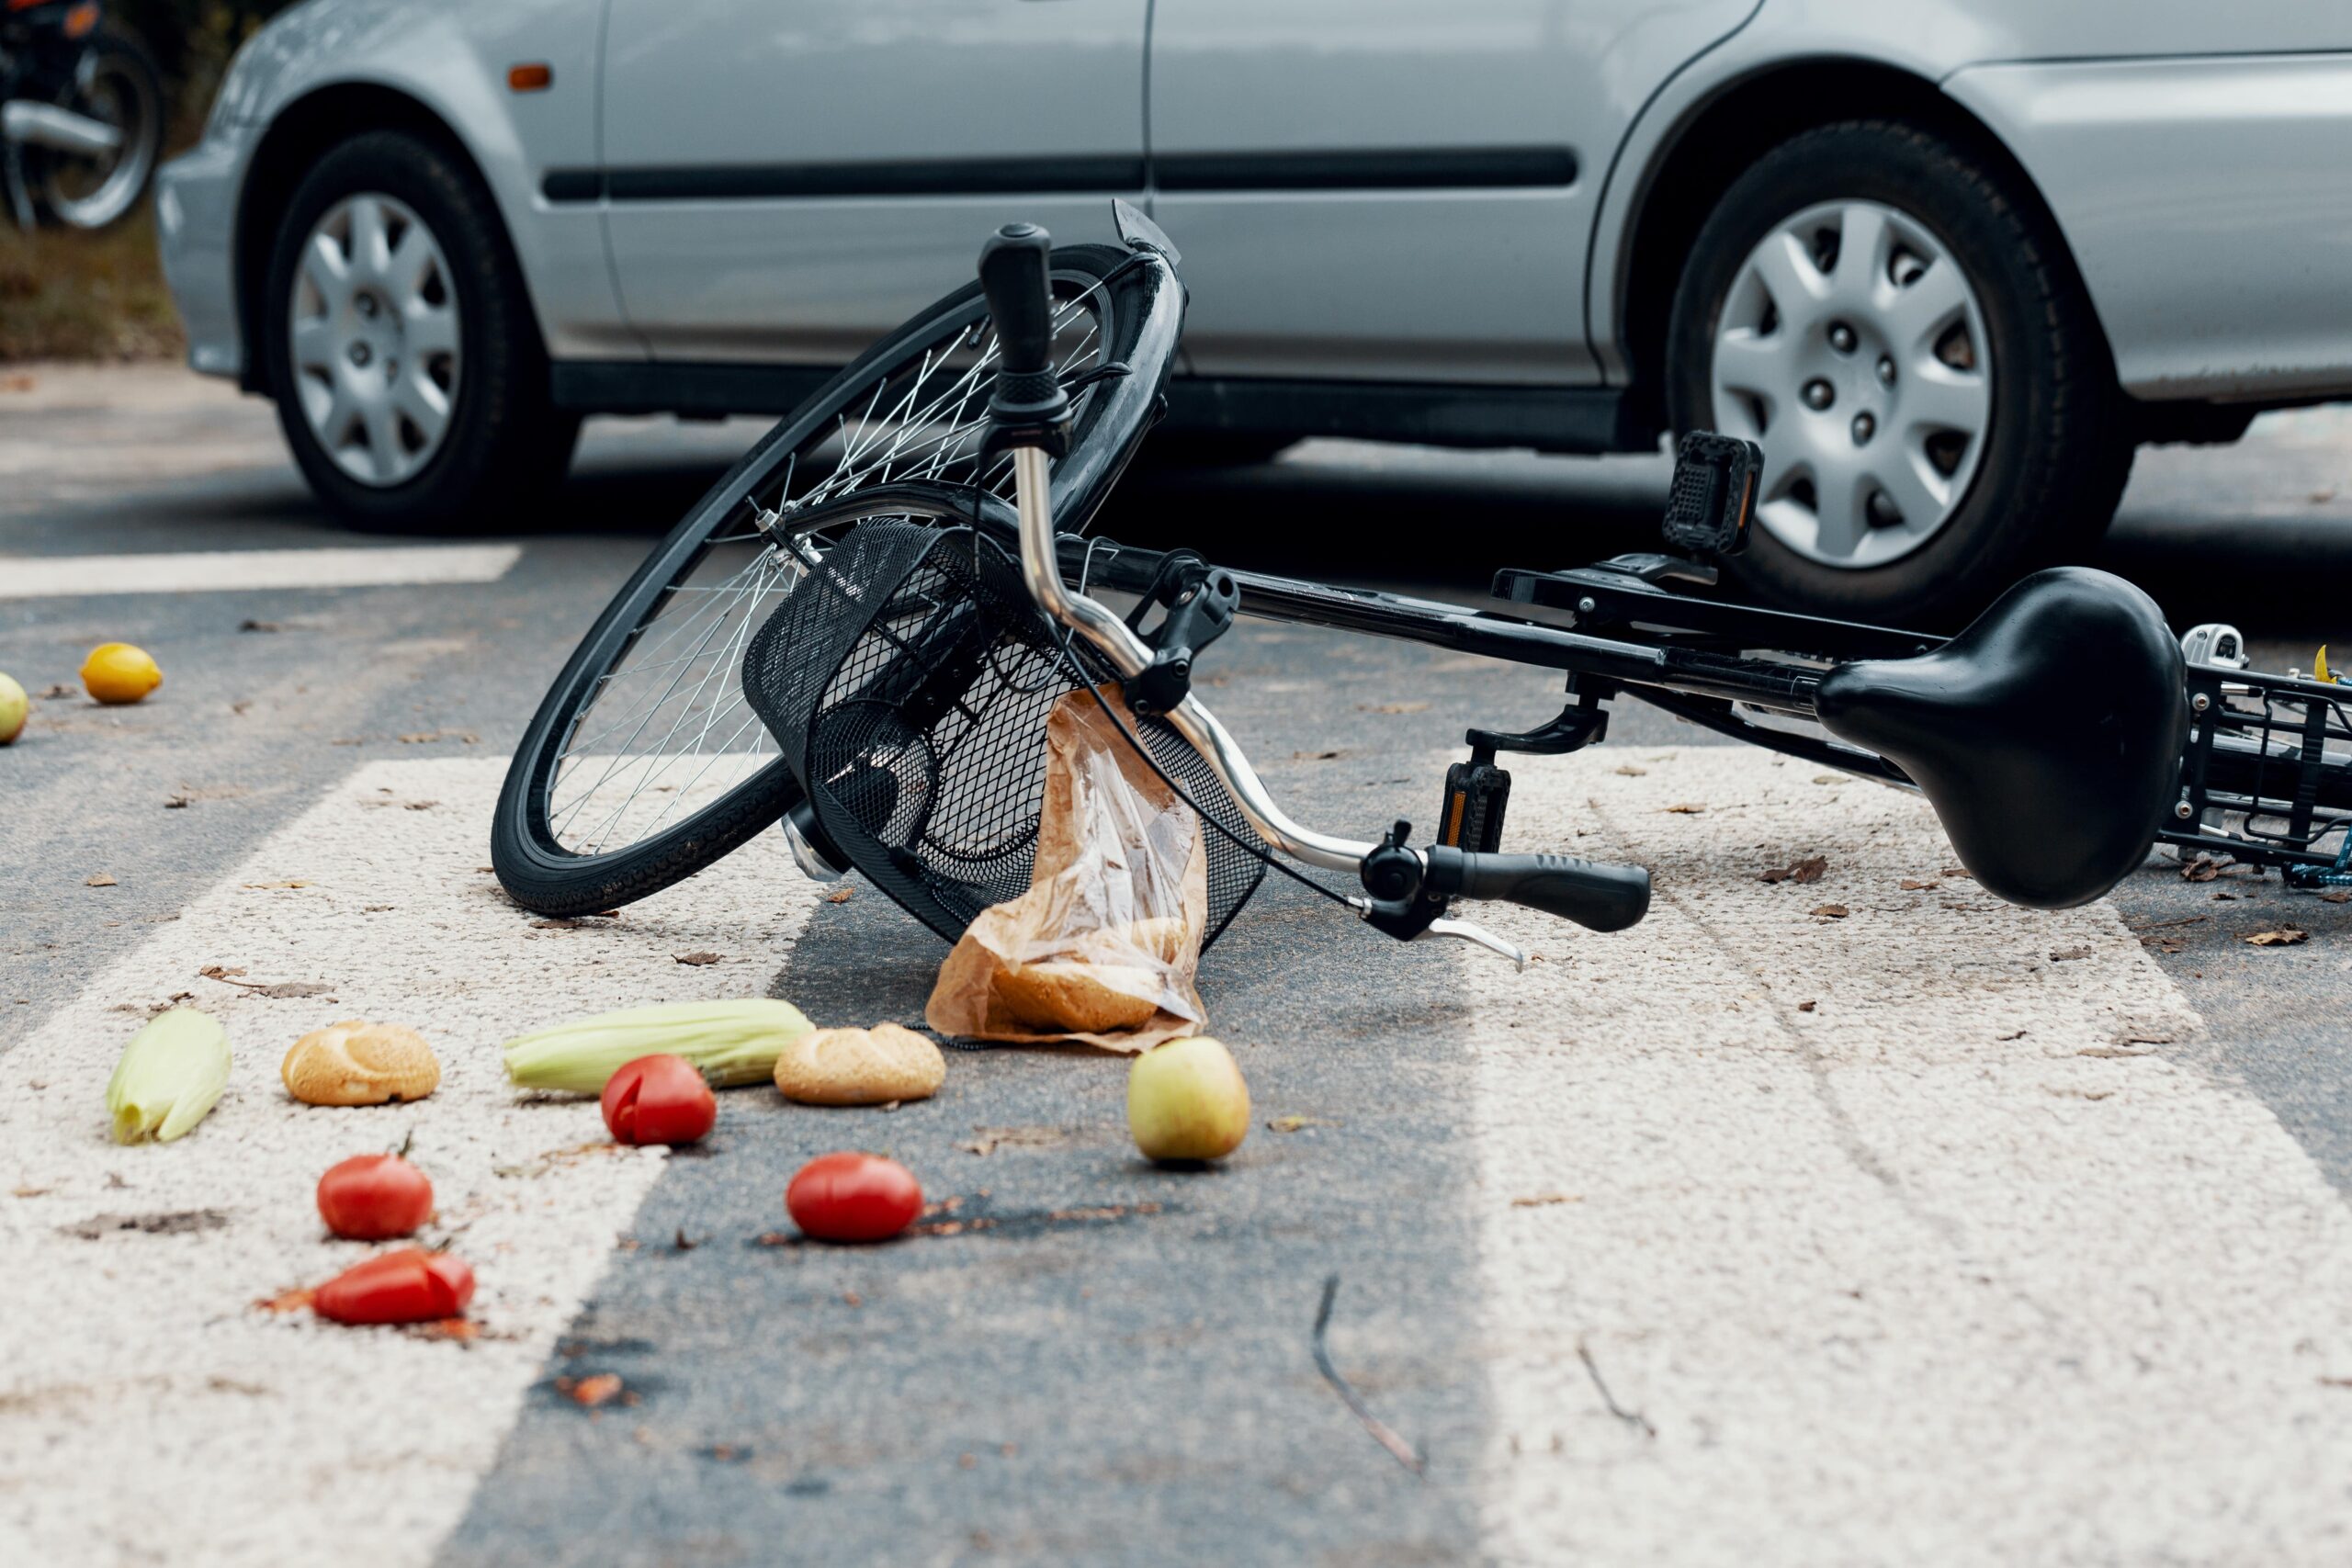 Bicycle Laying On A Pedestrian Walk With Some Vegetables Spread Out